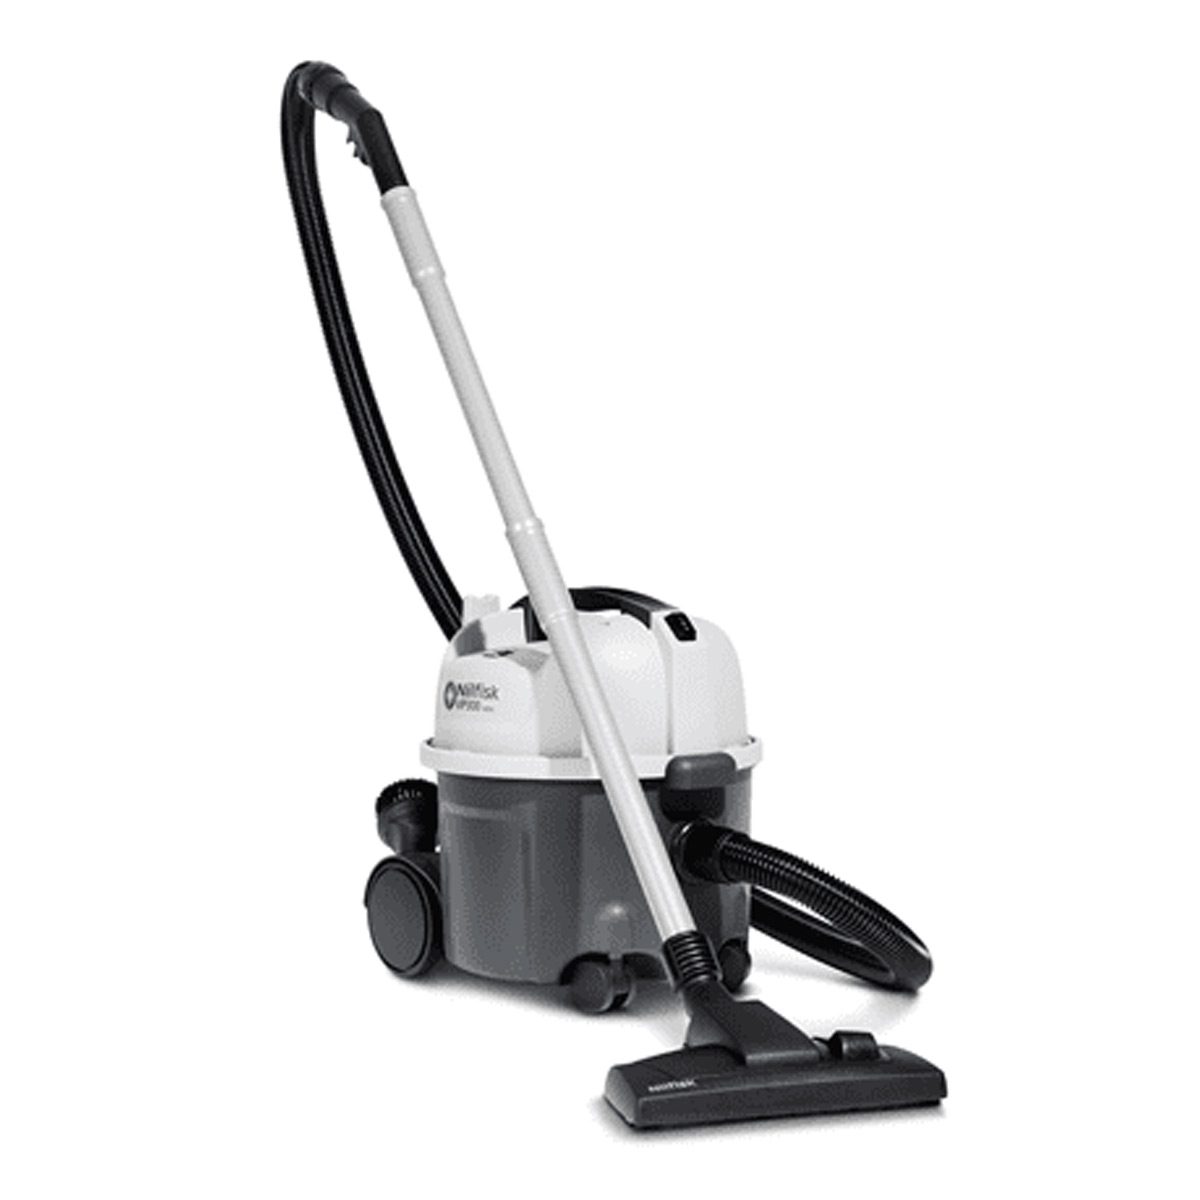 machinery-matting-vacuums-nilfisk-vp300-hepa-vacuum-cleaner-high-quality-air-exceptional-efficient-cleaning-performance-exceptional-efficient-great-flexibility-wide-range-features-vjs-distributors-VP300